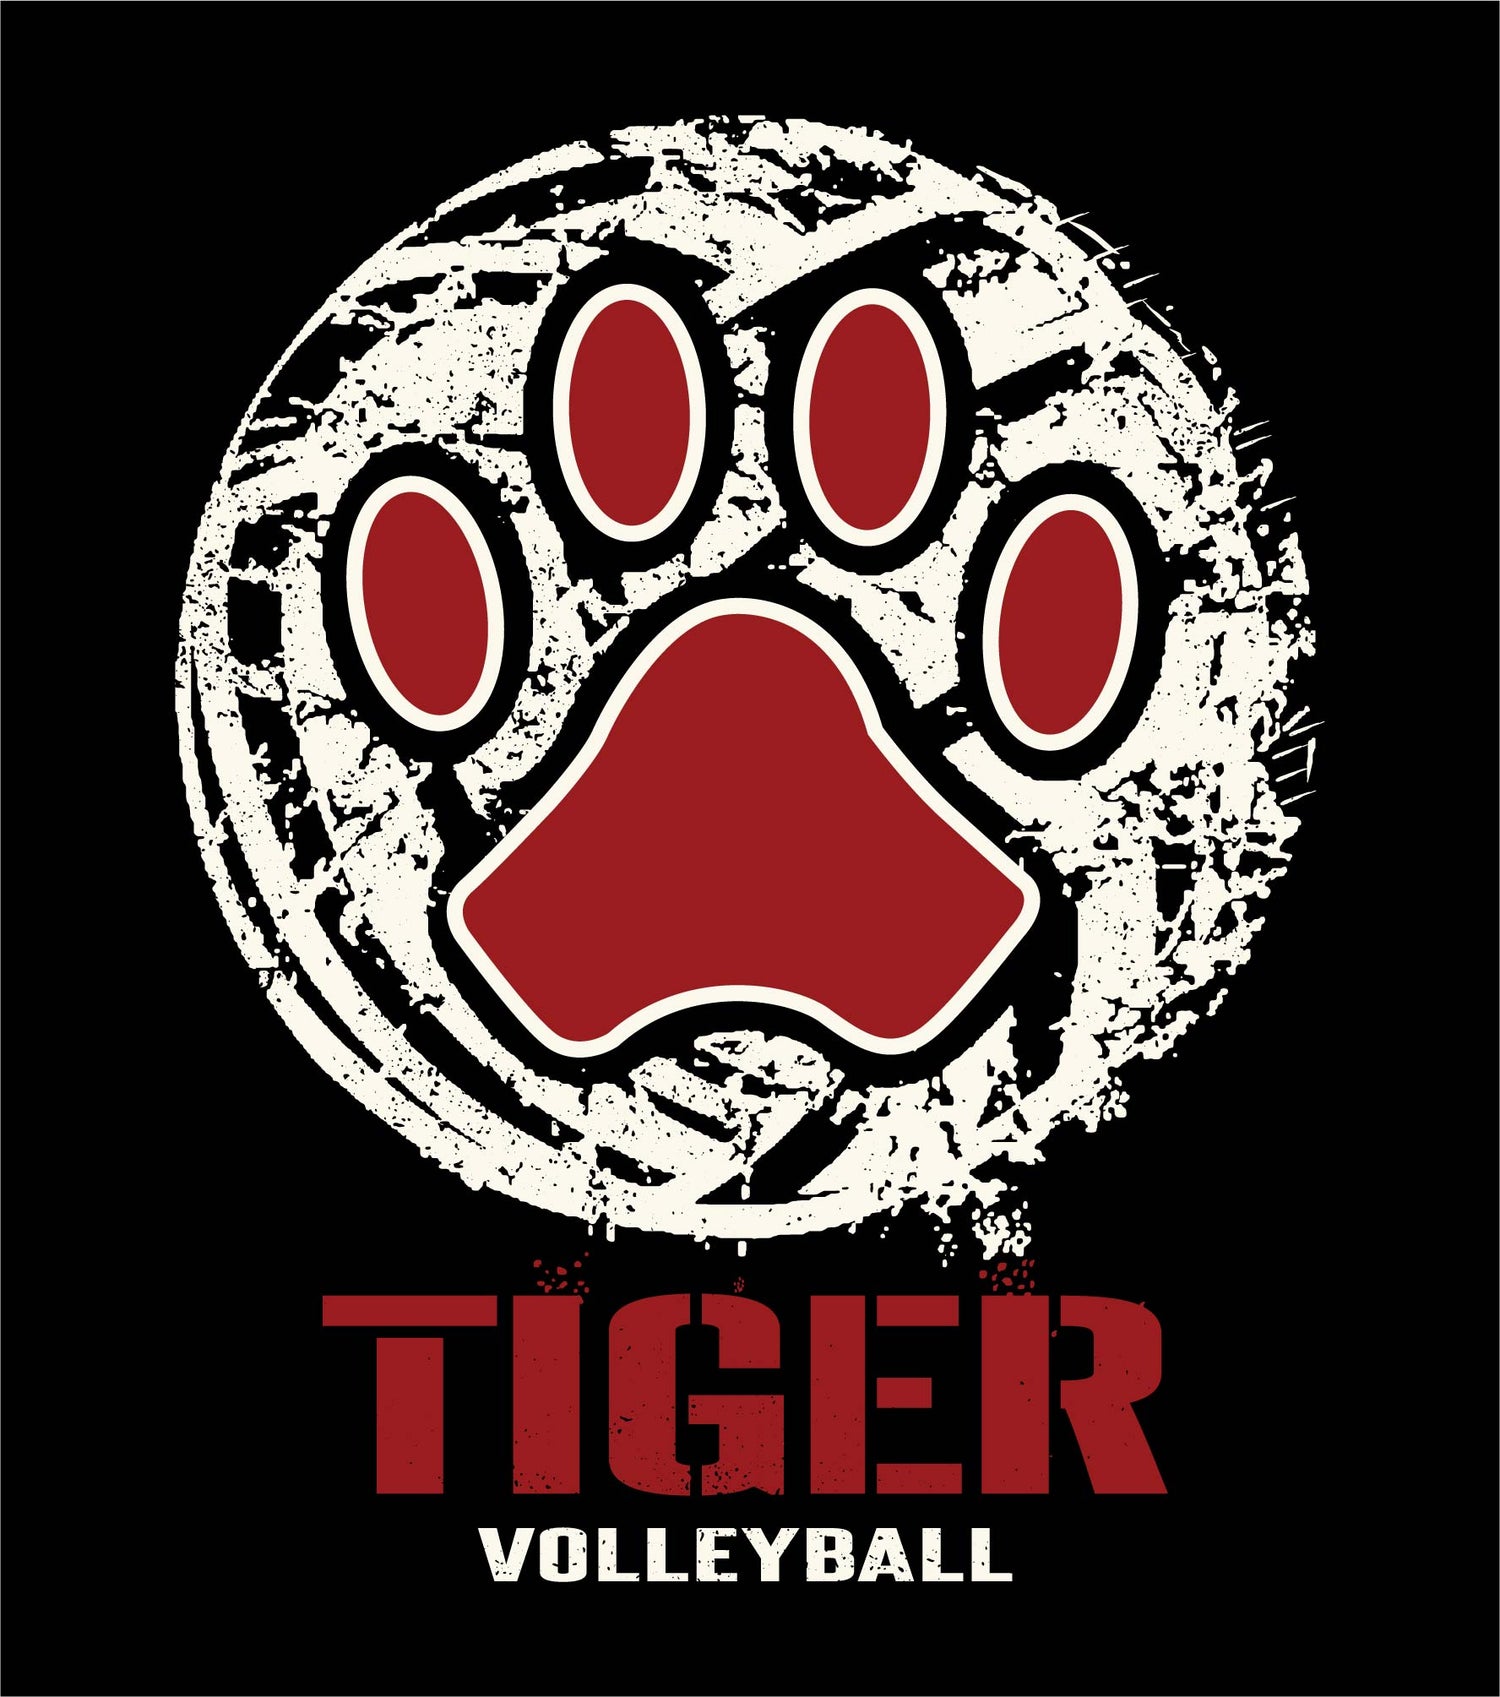 Princeton Volleyball Pre-Order Store